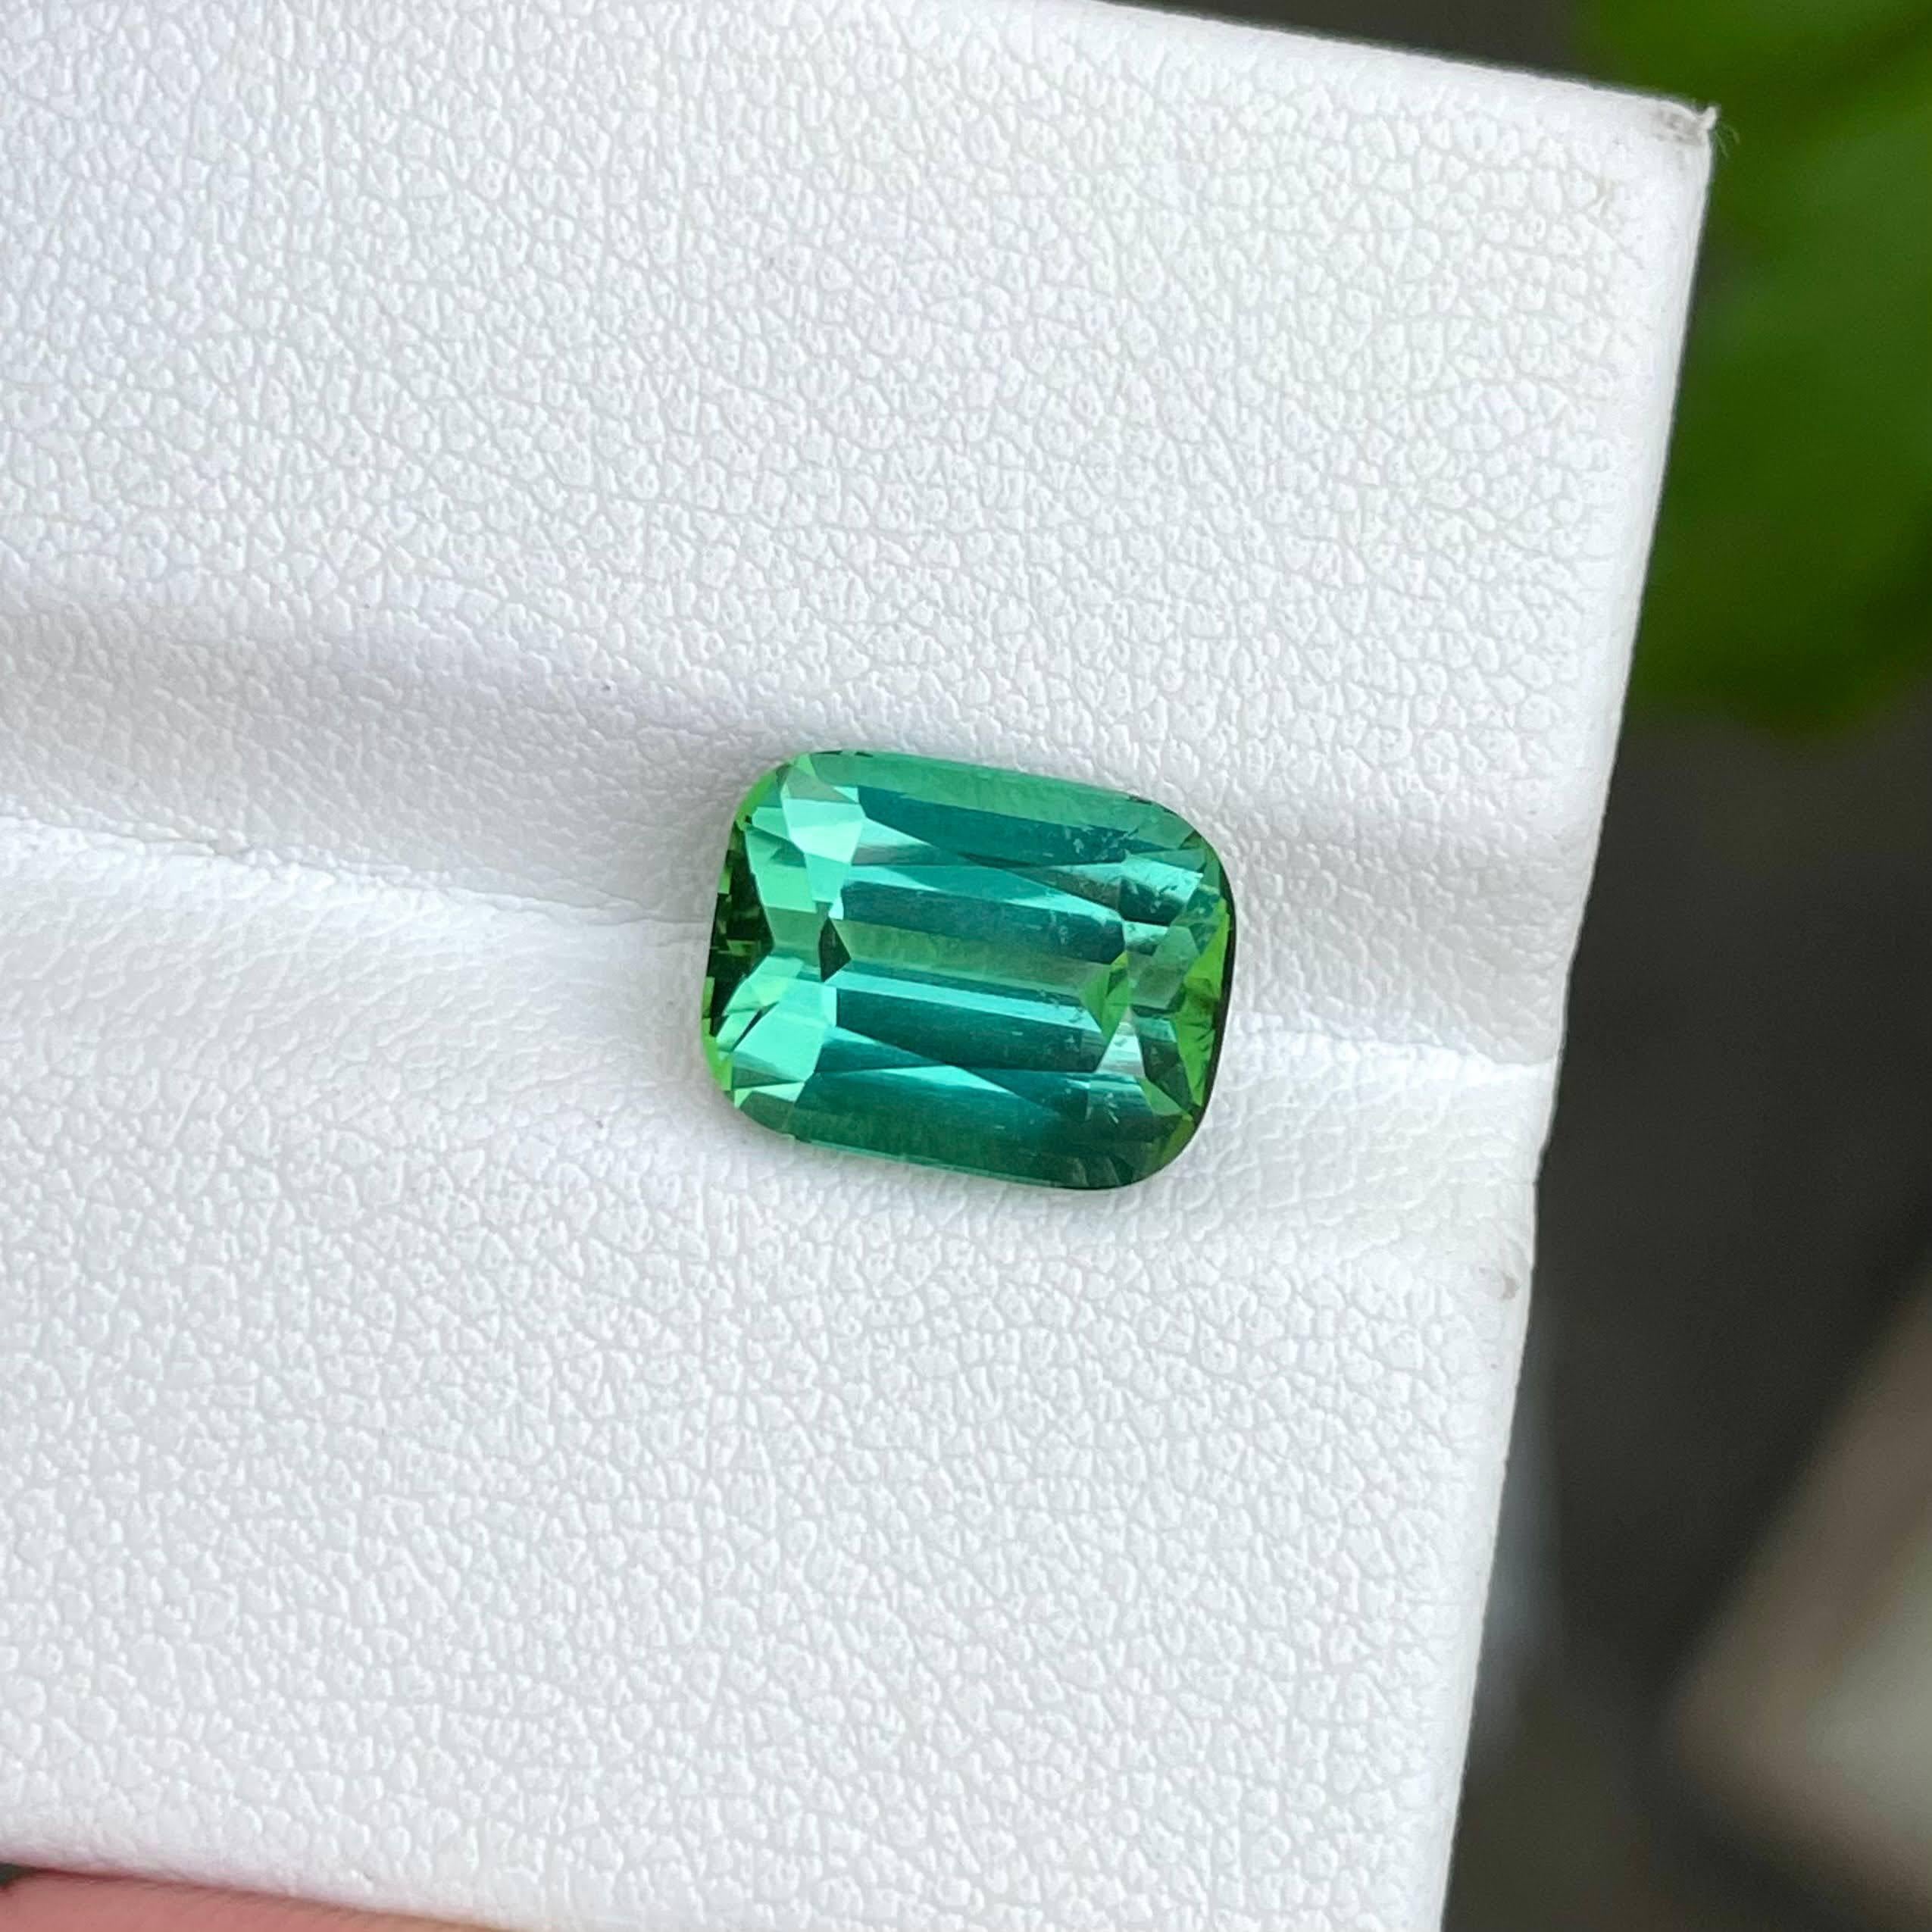 Weight 4.97 carats 
Dimensions 10.7x8.32x6.78 mm
Treatment none 
Origin Afghanistan 
Clarity VVS
Shape cushion 
Cut Fancy cushion




In a breathtaking display of nature's artistry, a 4.97 carat Greenish Blue Tourmaline takes center stage,